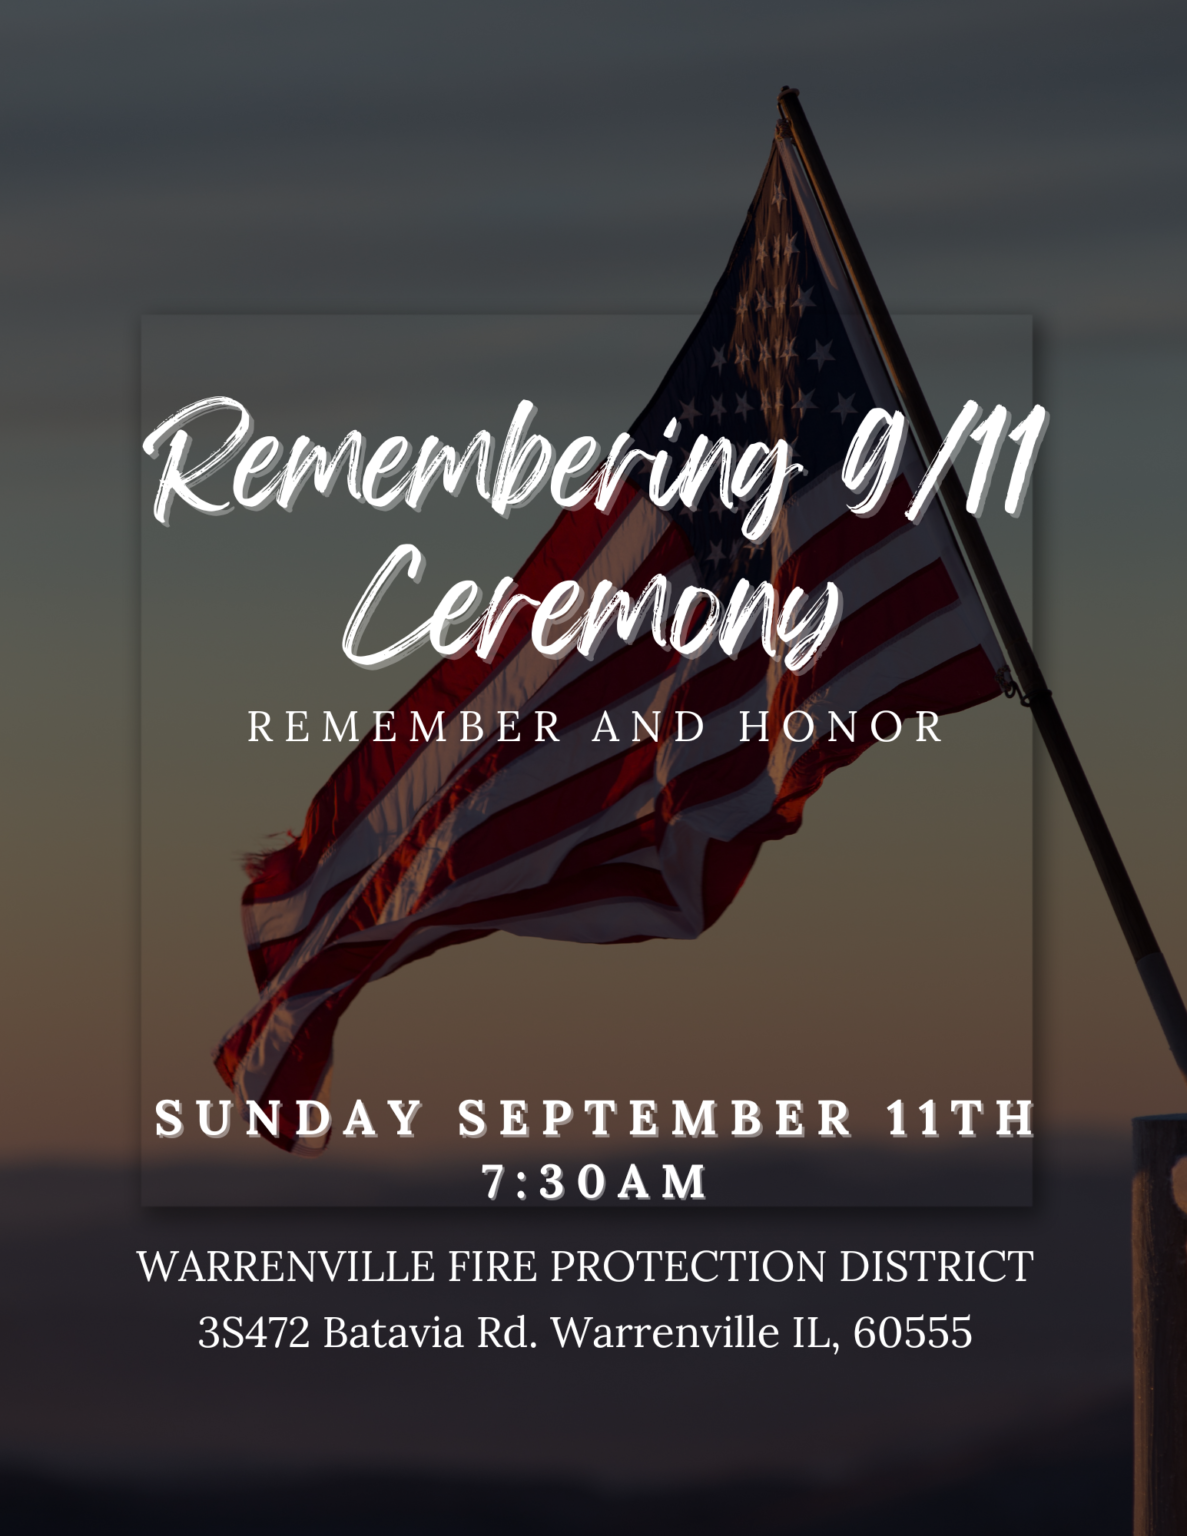 Remembering 9/11 Ceremony Warrenville Fire Protection District